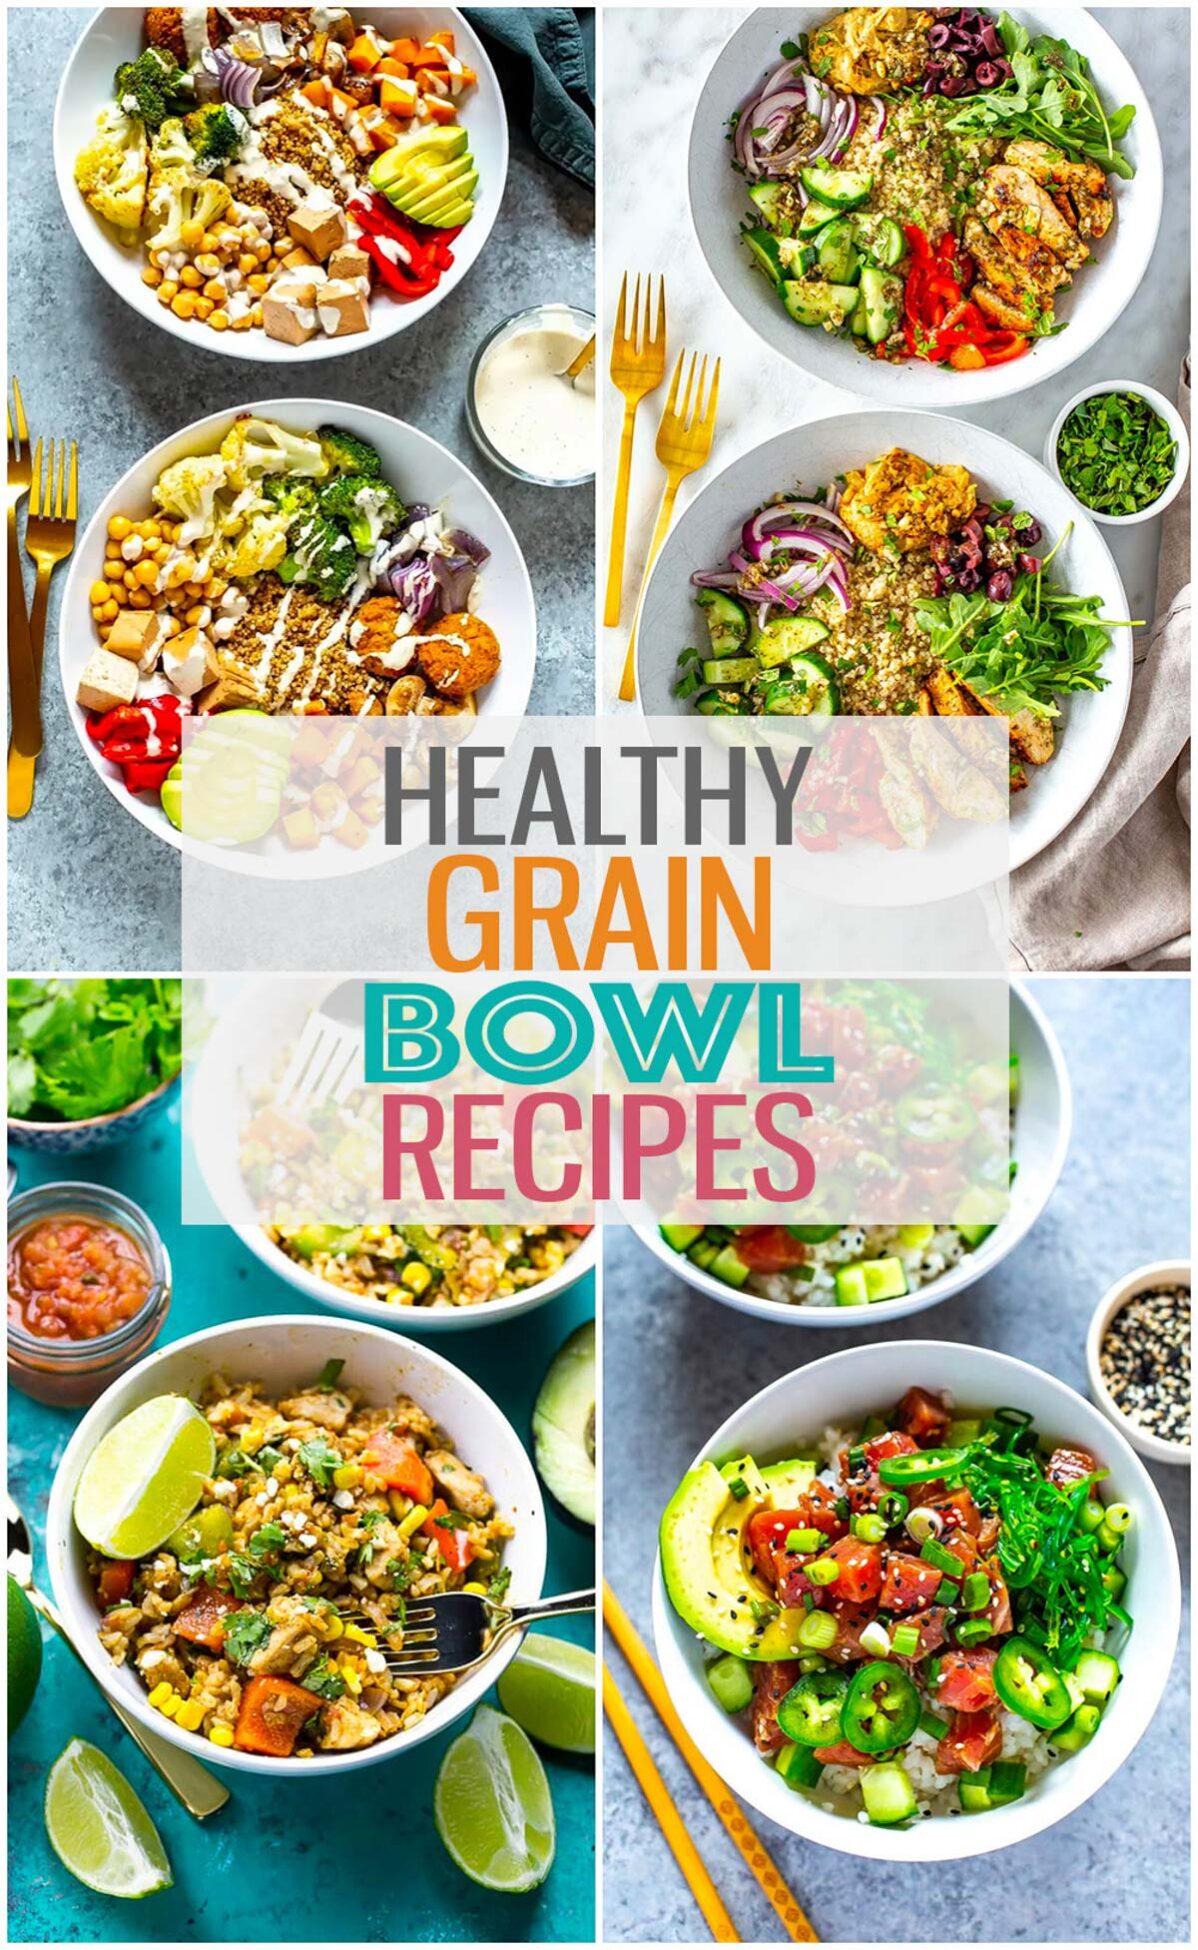 A collage of 4 different grain bowl recipes with the text "Healthy Grain Bowl Recipes" layered over top.